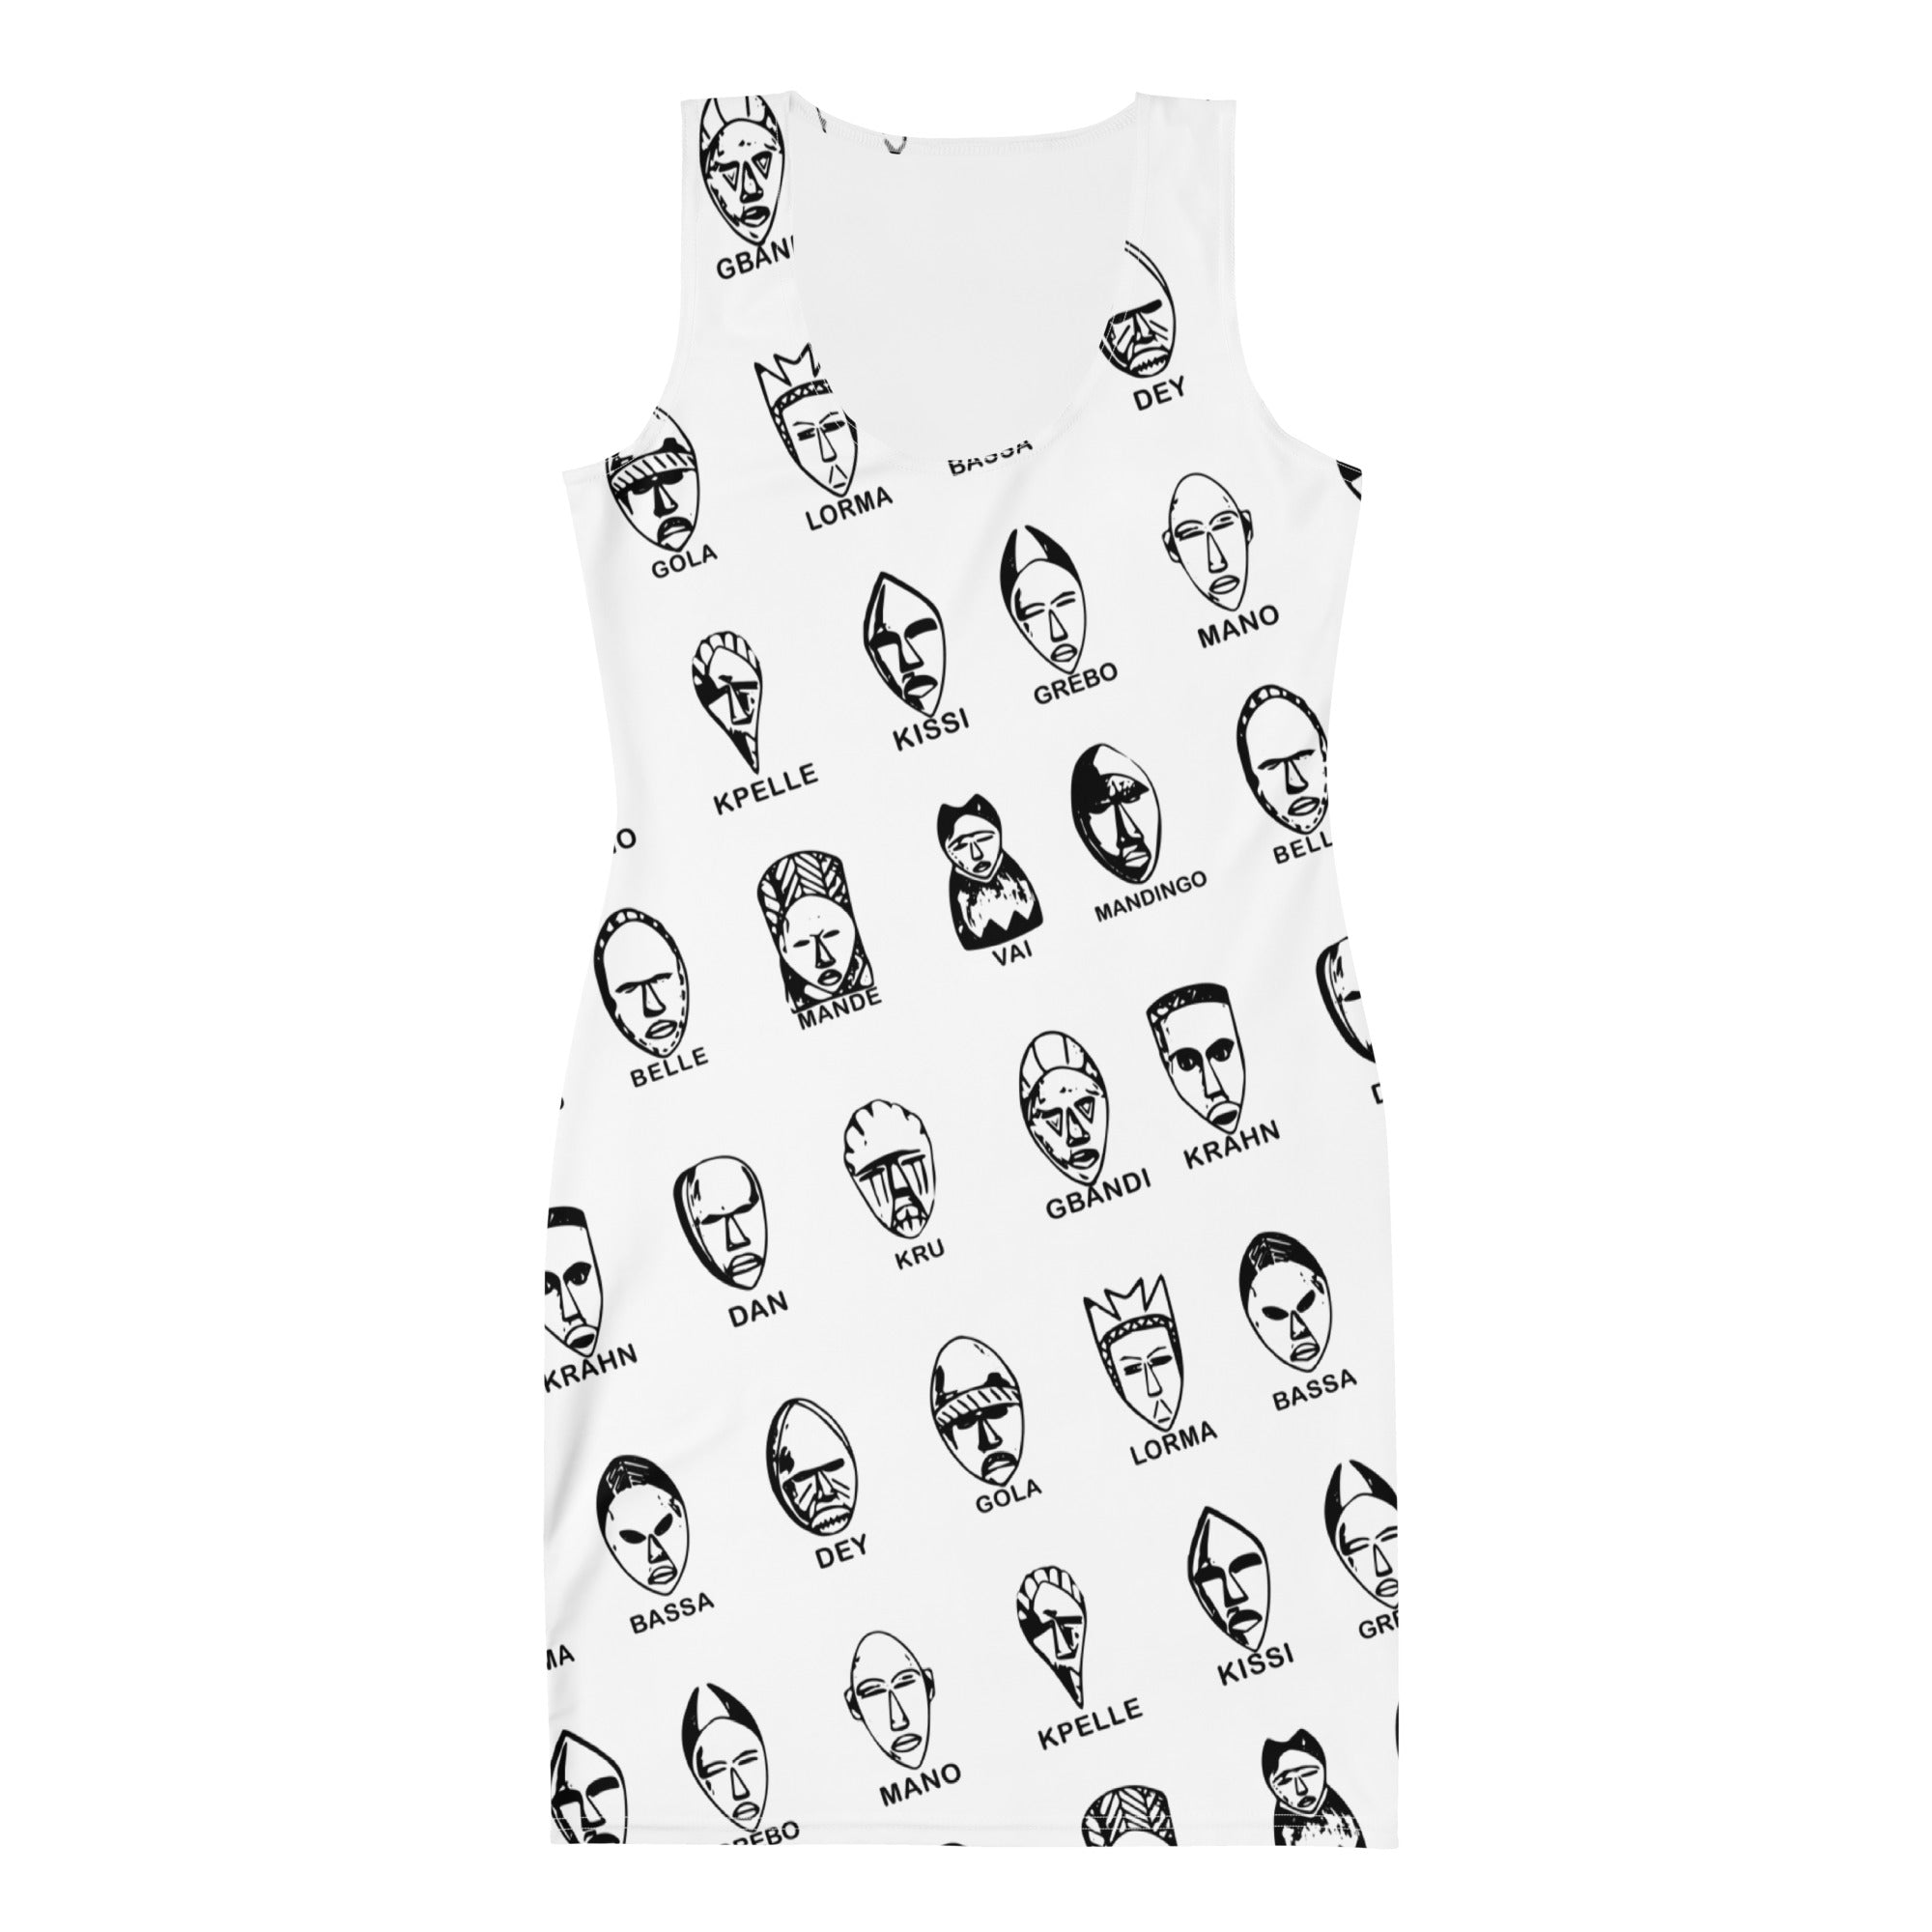 16 Tribes Sublimation Cut & Sew Dress